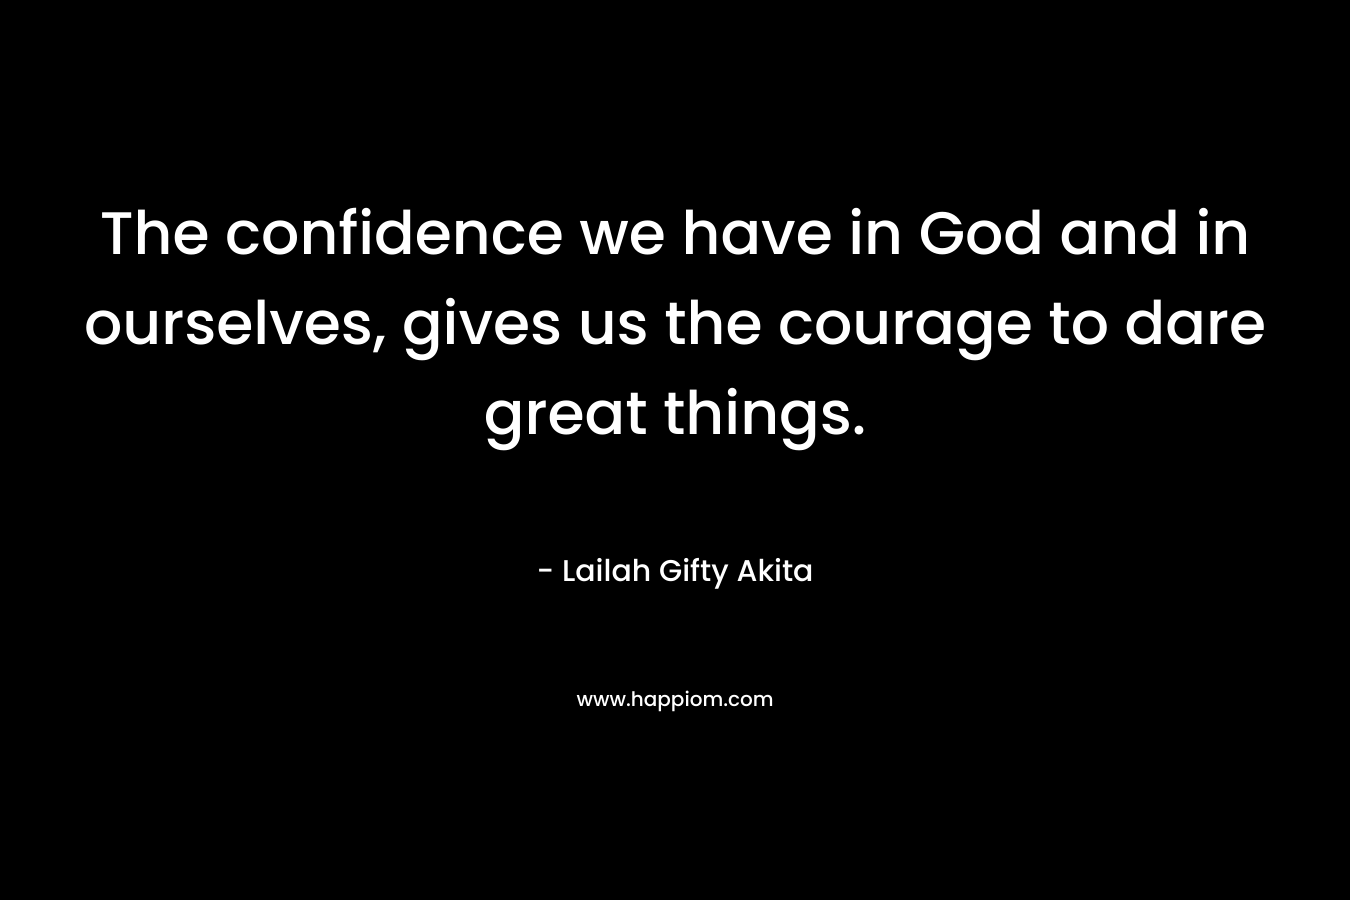 The confidence we have in God and in ourselves, gives us the courage to dare great things.